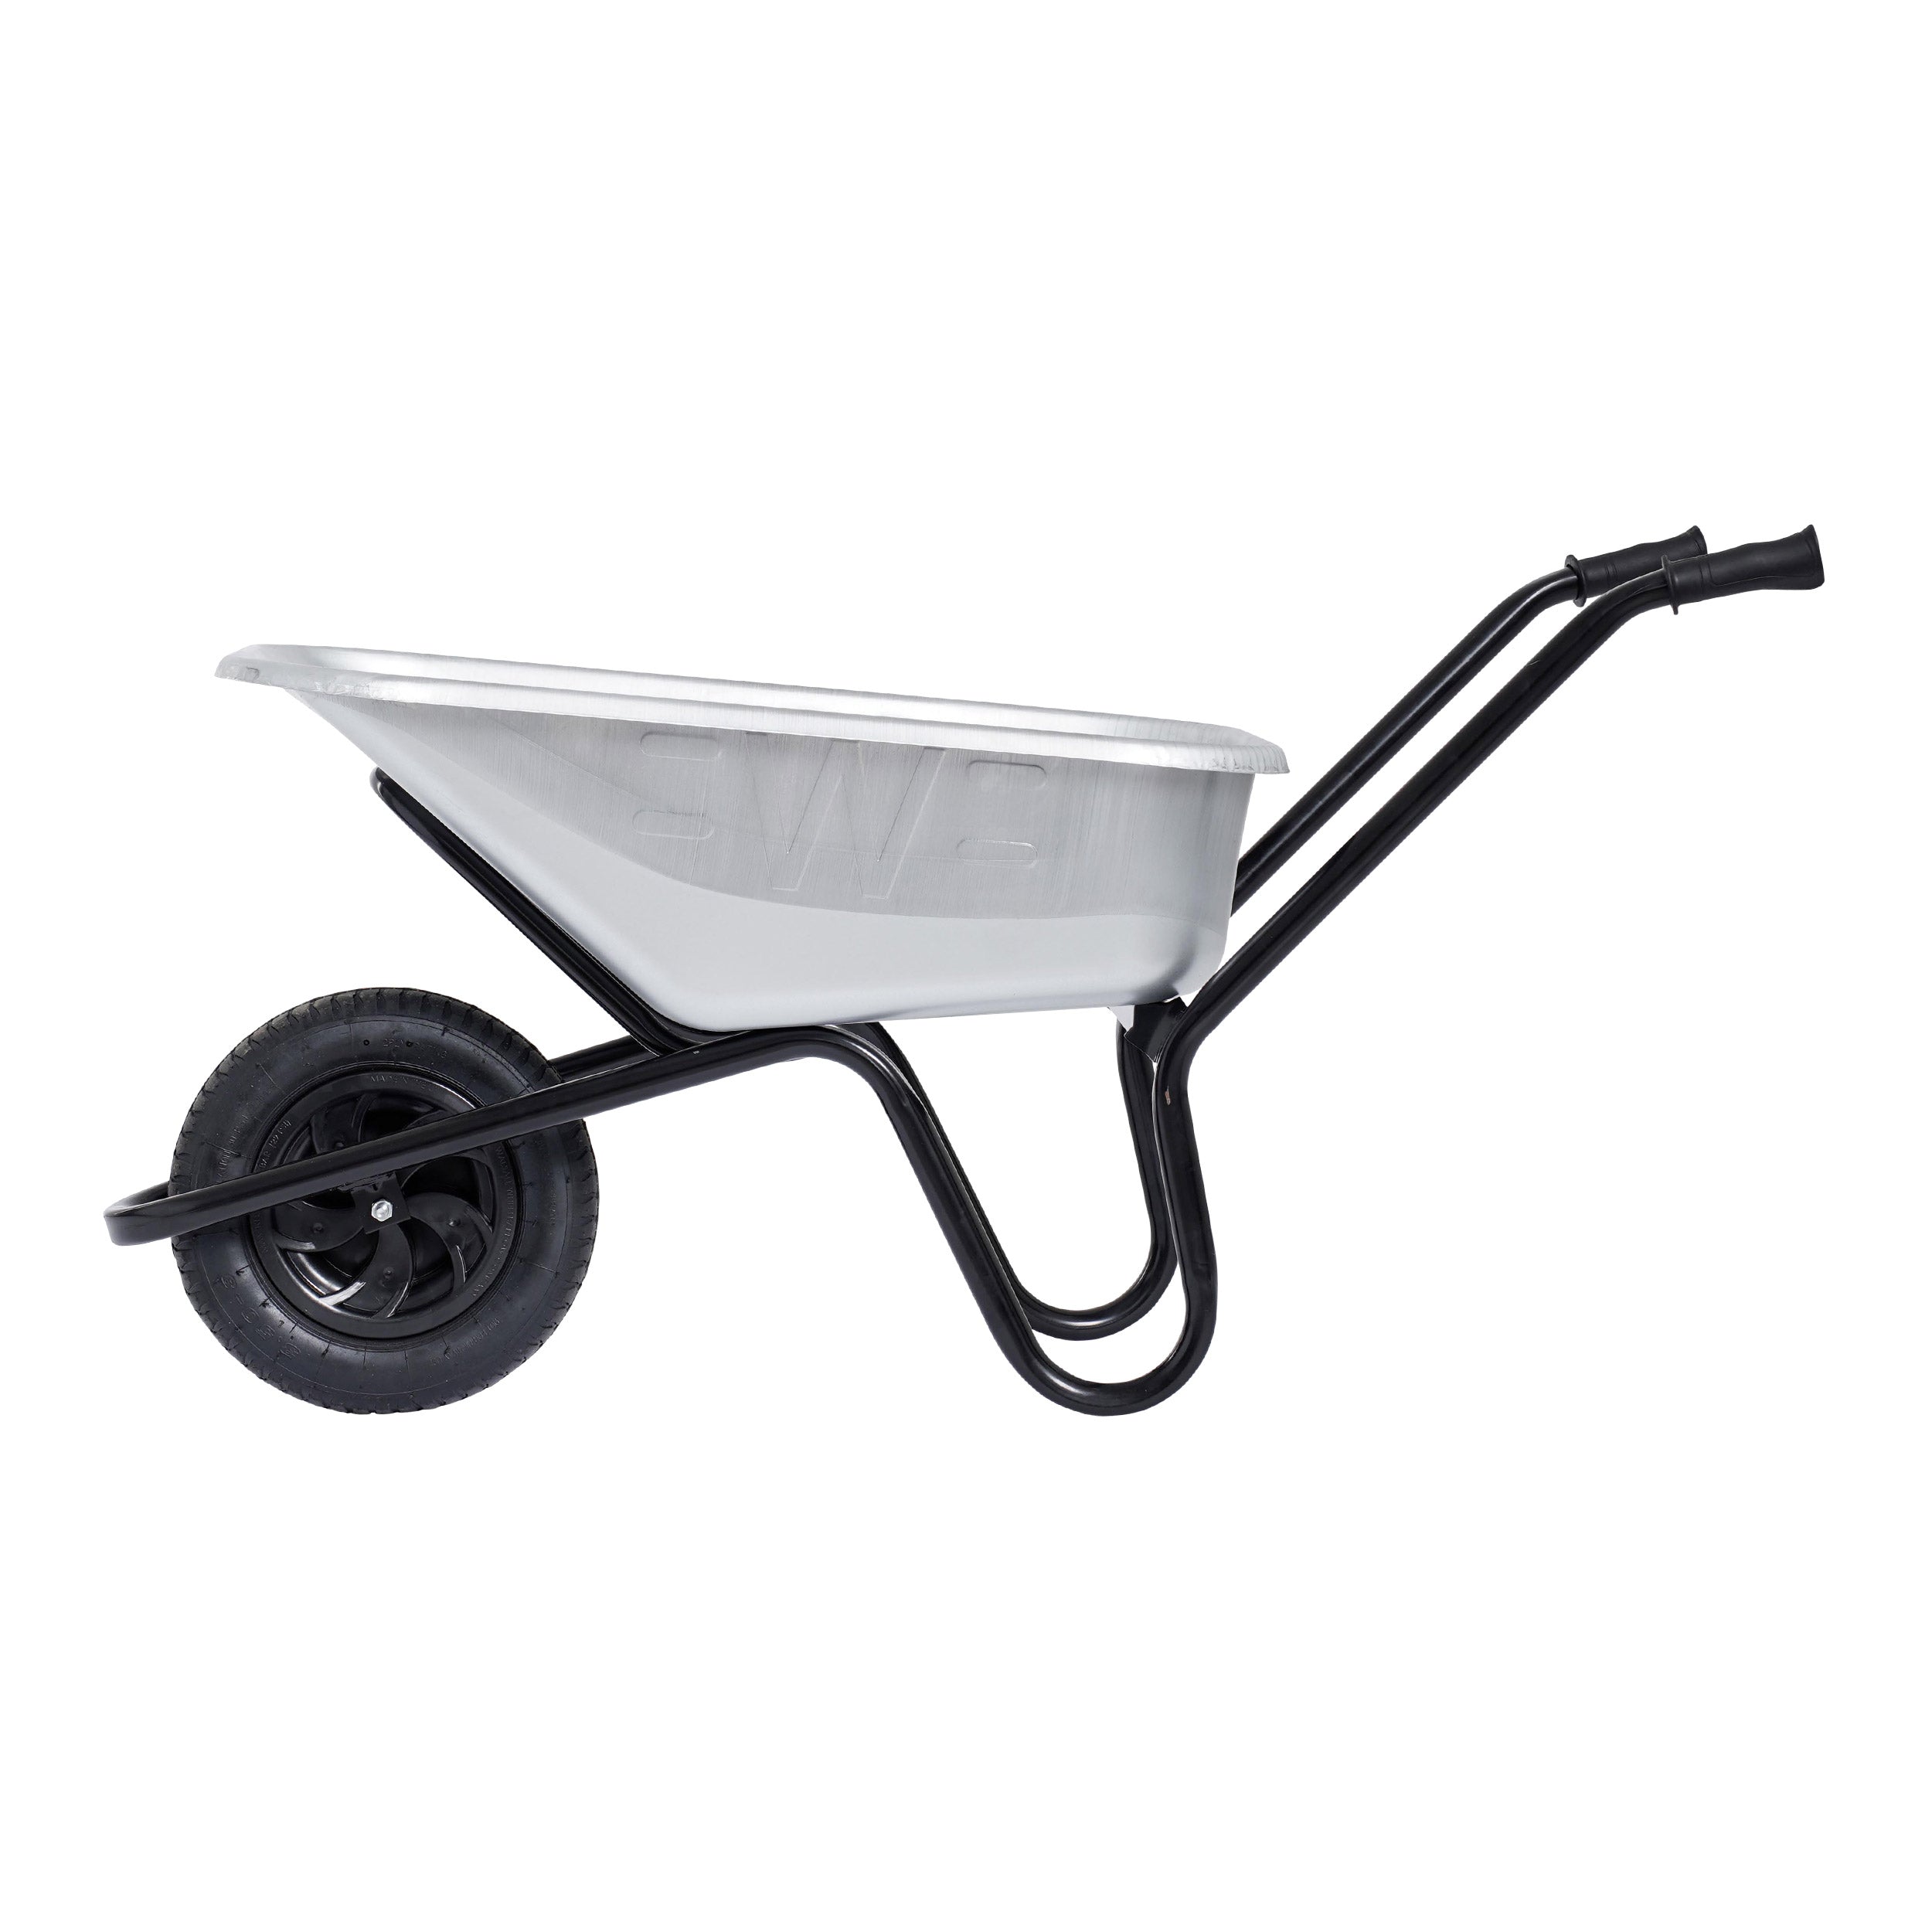 Side image of Invincible Galvanised Wheelbarrow, silver body with black tyre and frame